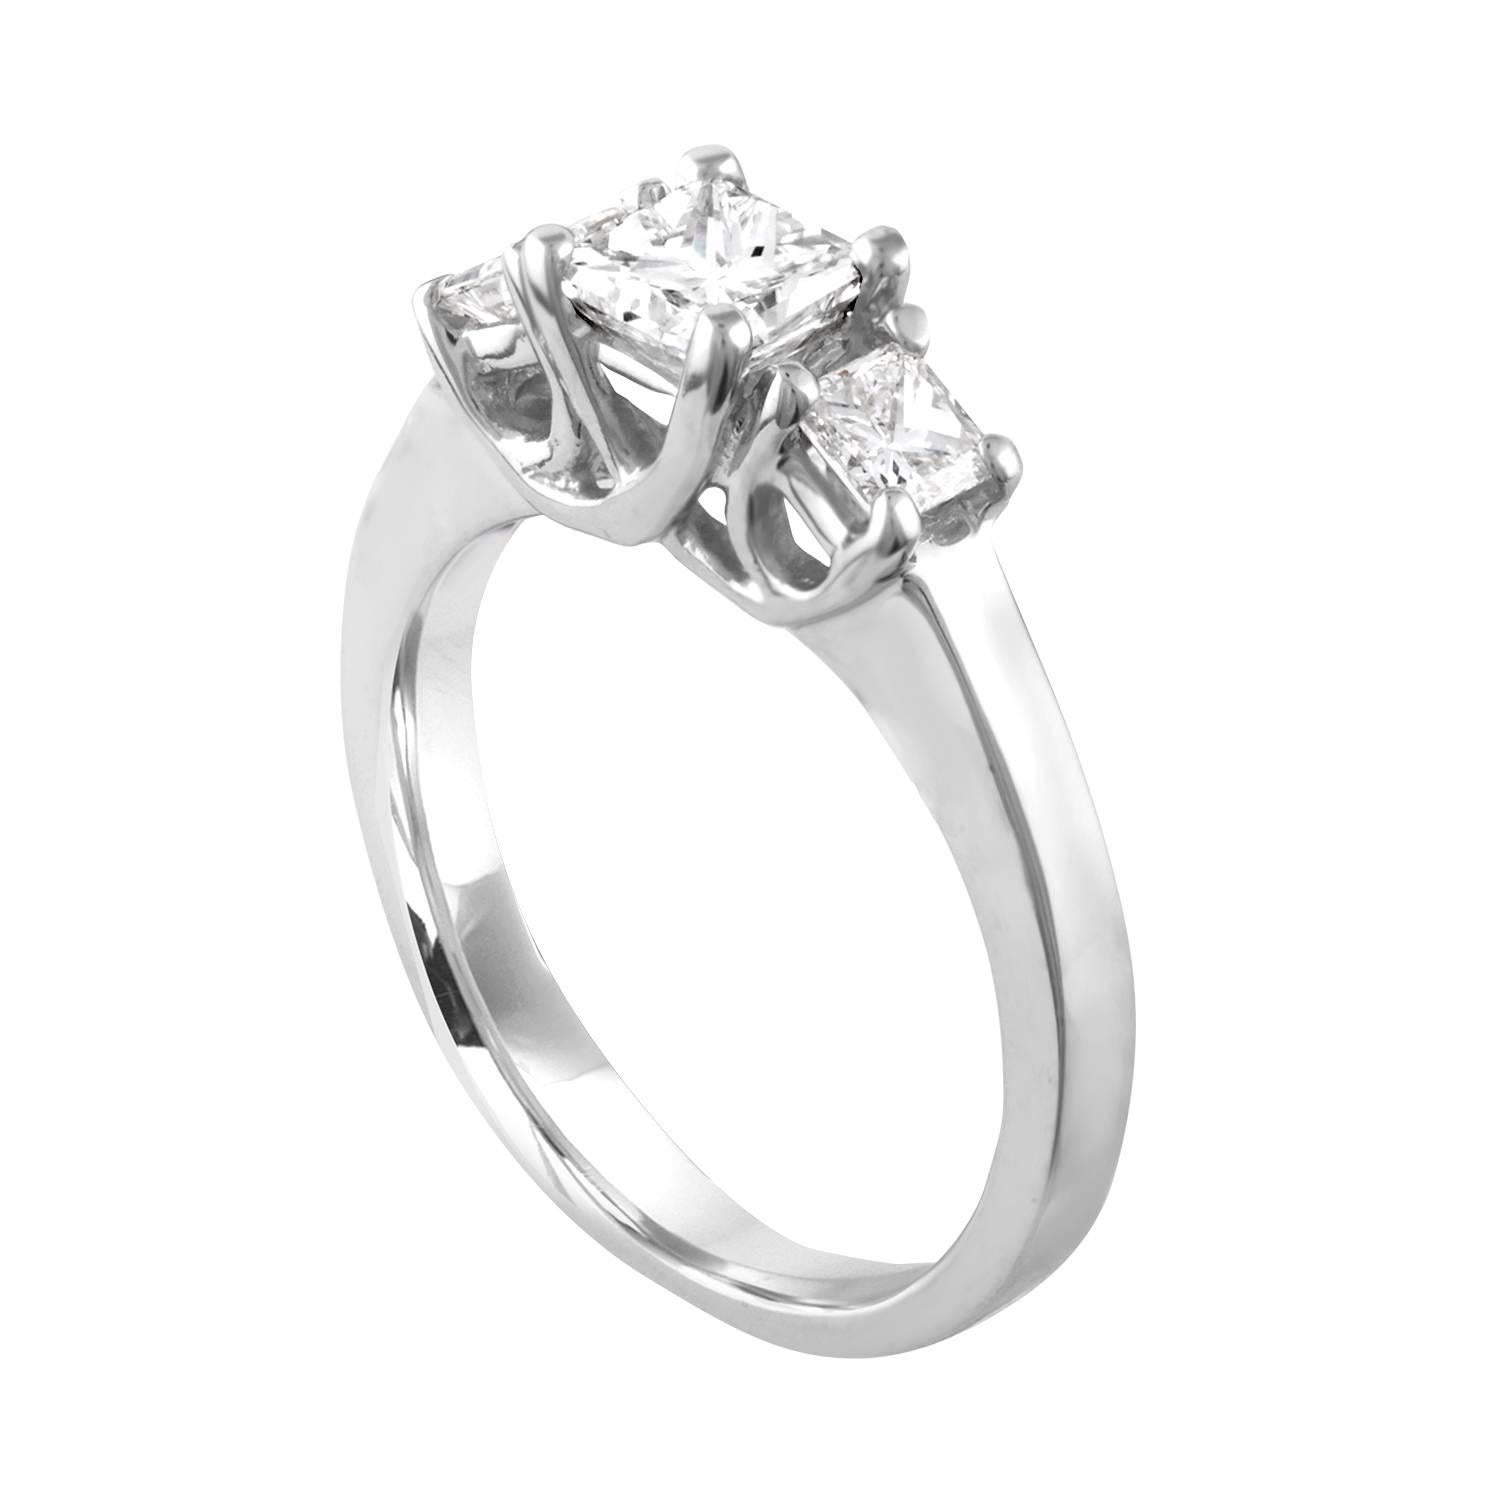 The ring is 14K White Gold
The 3 Diamonds are Princess Cut
The Center stone is 0.70 Carats E/F VVS
The 2 Side stones are 0.50 Carats Total Weight E/F VVS
All 3 diamonds total 1.20 Carats.
The ring weighs 3.5 grams
The ring is a size 5.5, sizable.